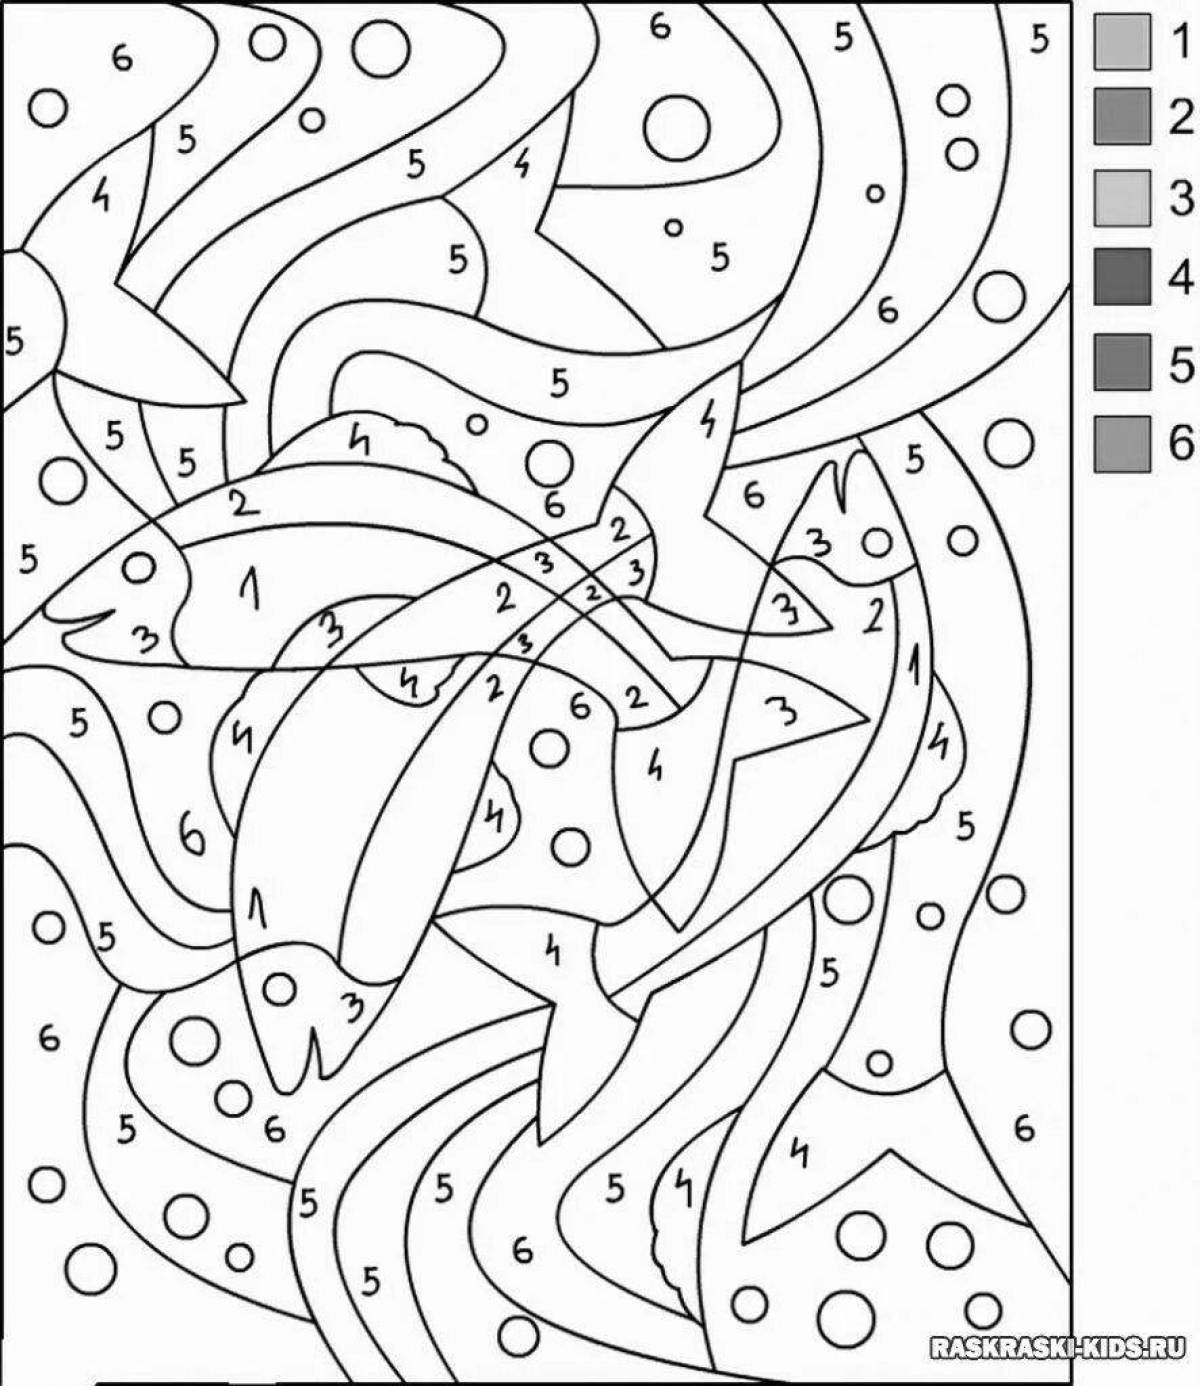 Fun coloring by numbers for boys 5-6 years old